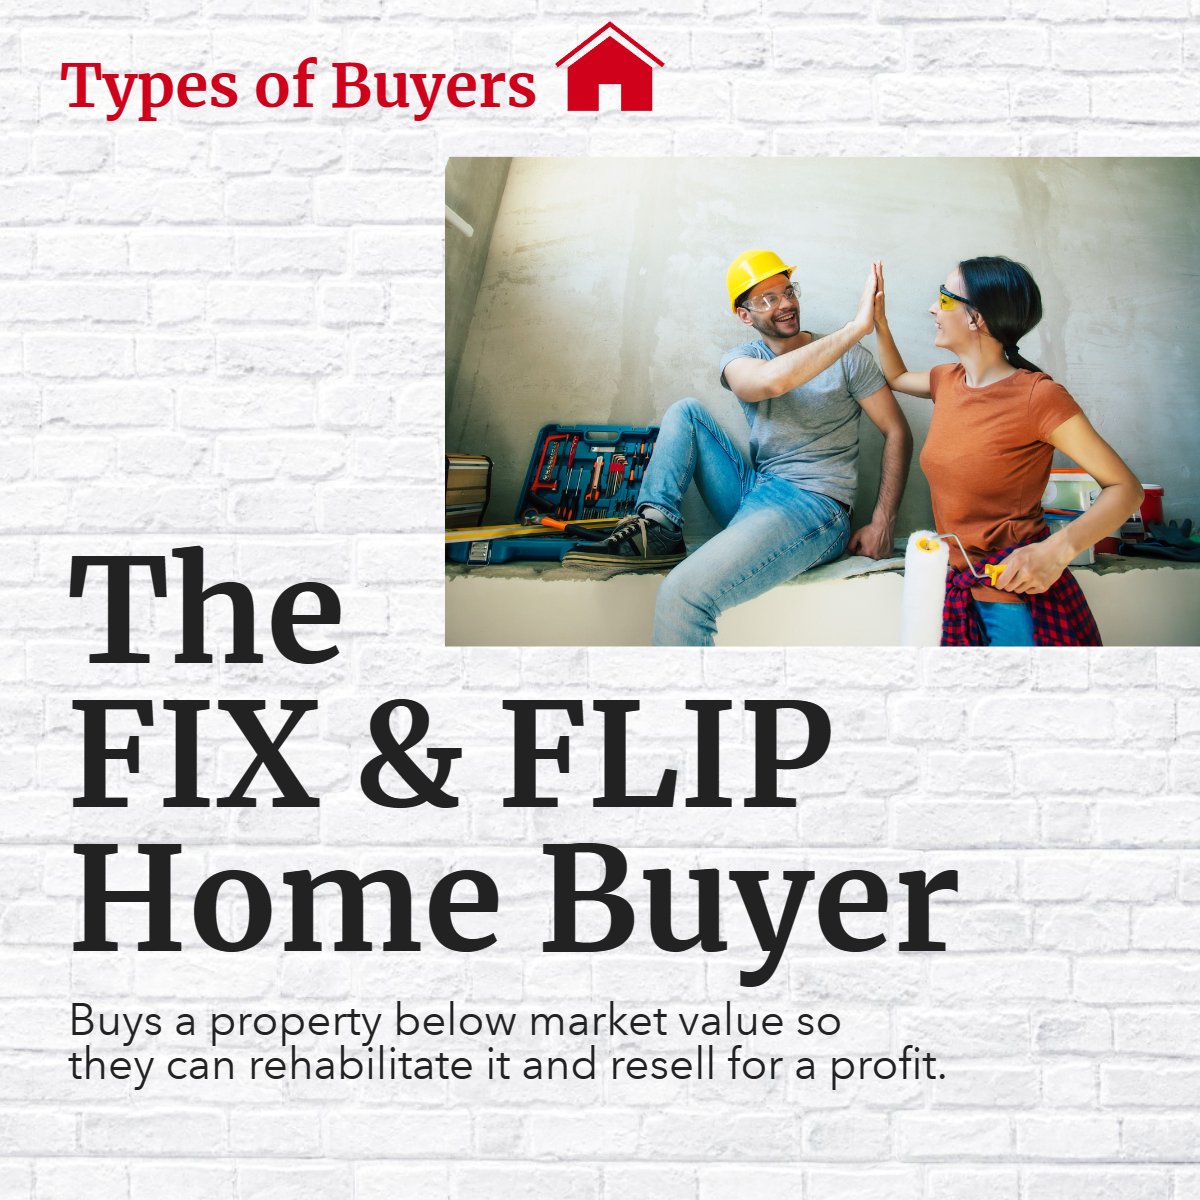 Are you a Fix & Flip type of buyer? 

Let us know below!

#FixAndFlip #RealEstate